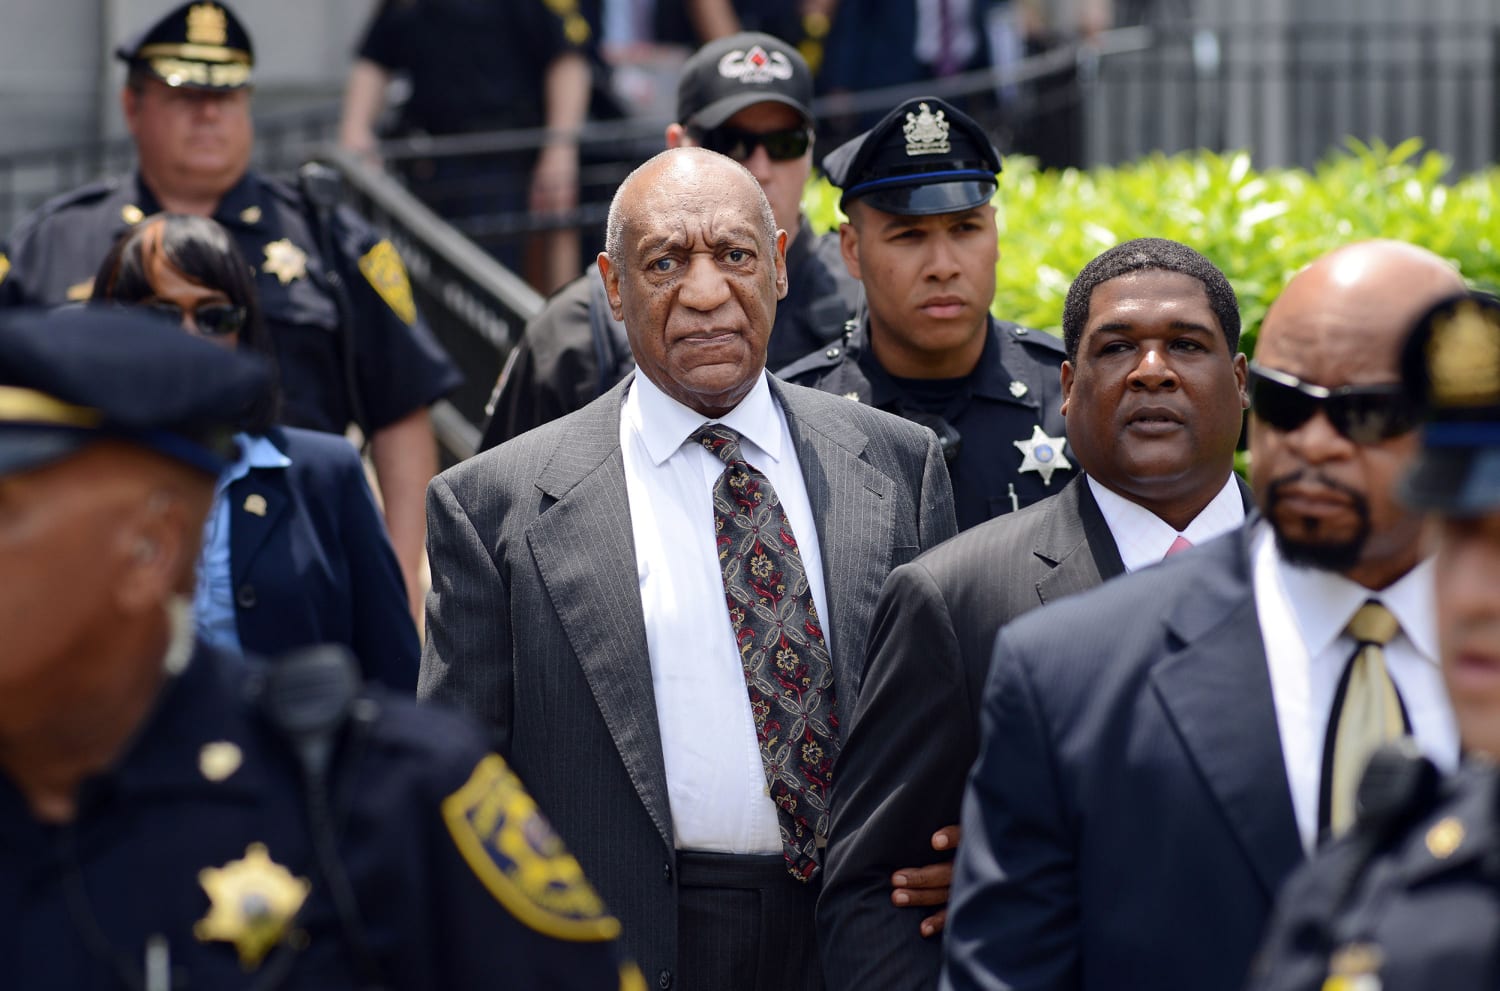 Bill-Cosby-prosecutors-ask-U.S.-Supreme-Court-to-review-decision-to-overturn-conviction